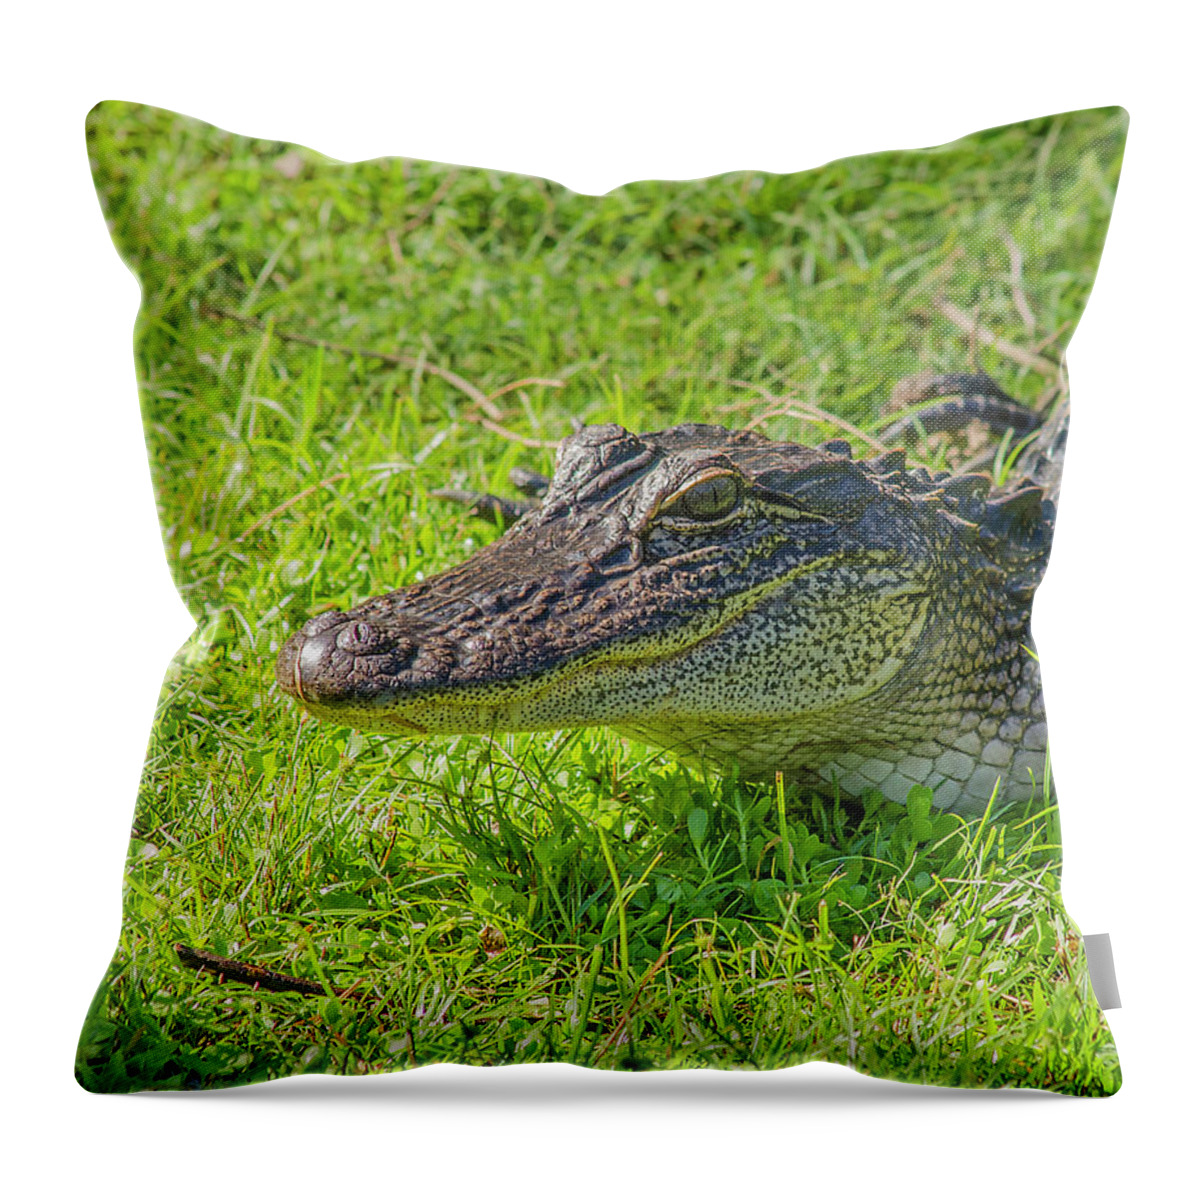 Louisiana Throw Pillow featuring the photograph Alligator Up Close by Allen Sheffield